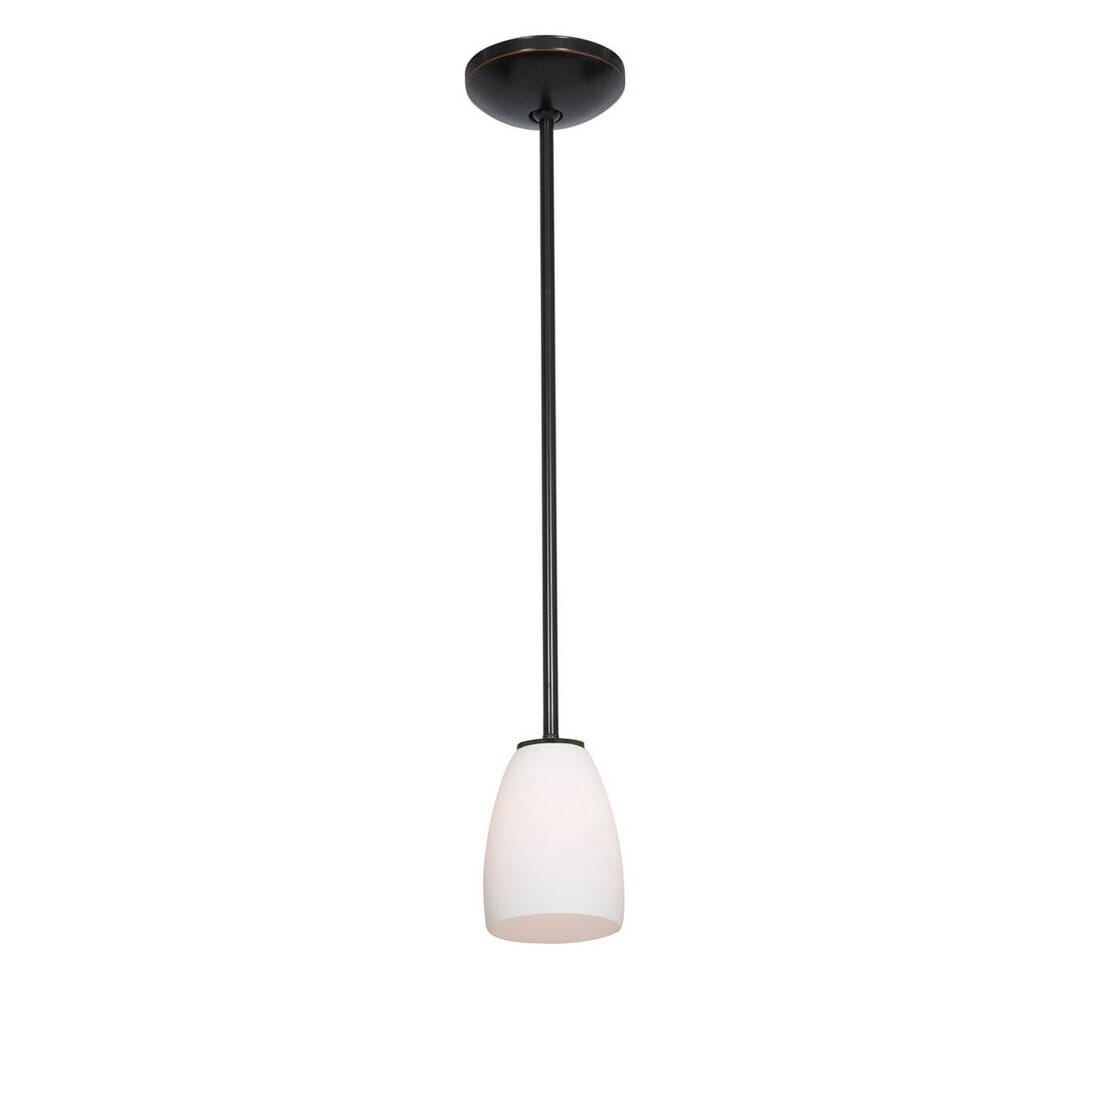 Access Sherry Pendant Light in Oil Rubbed Bronze -  Access Lighting, 28069-3R-ORB/OPL